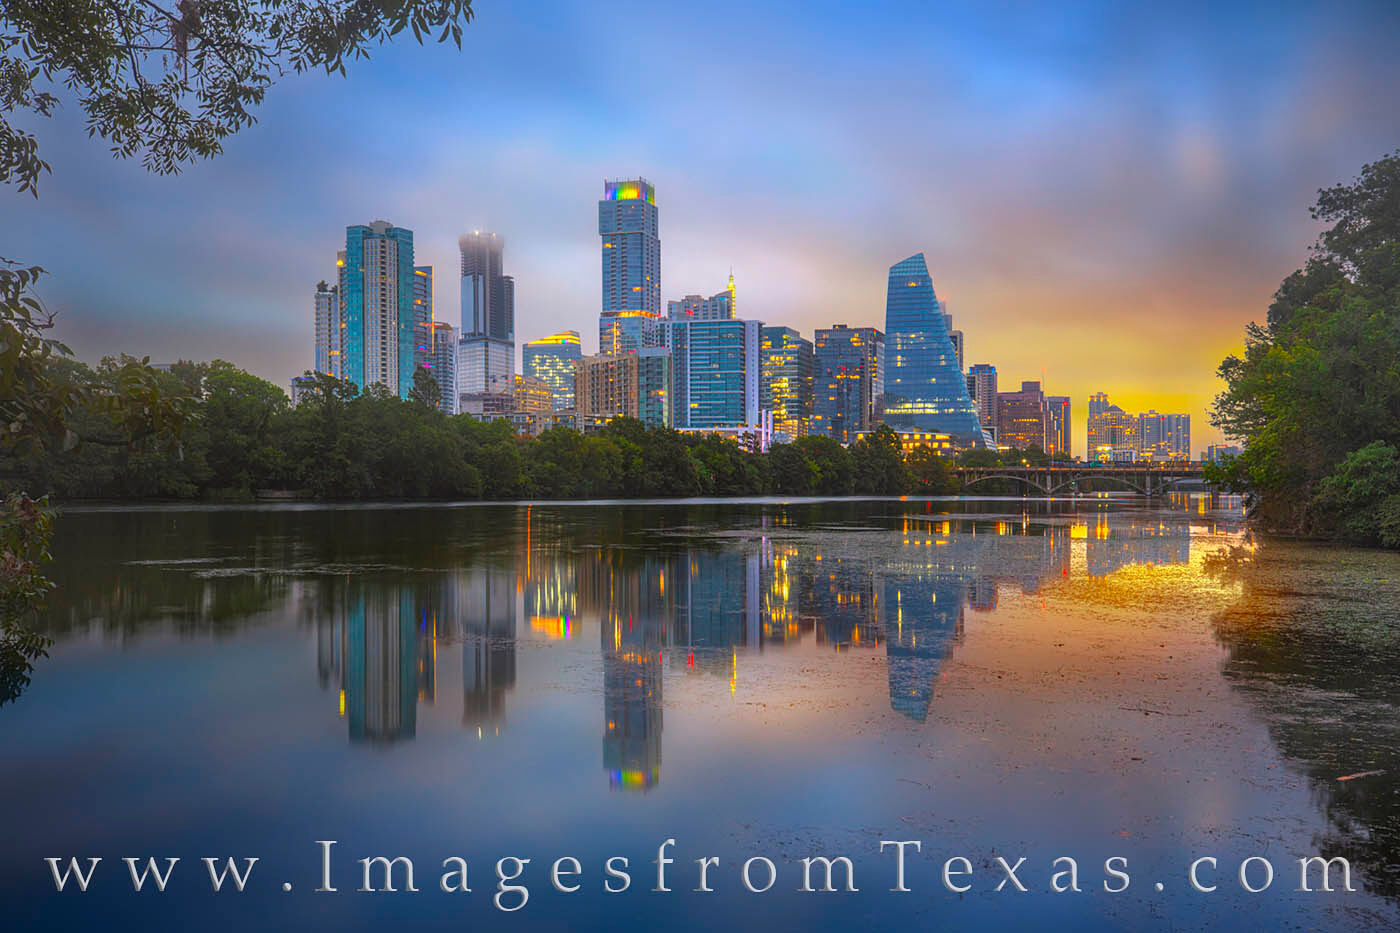 After a night of rains, Lady Bird Lake is calm and smooth. The early morning reflections from the skyline backlit by deep hues...